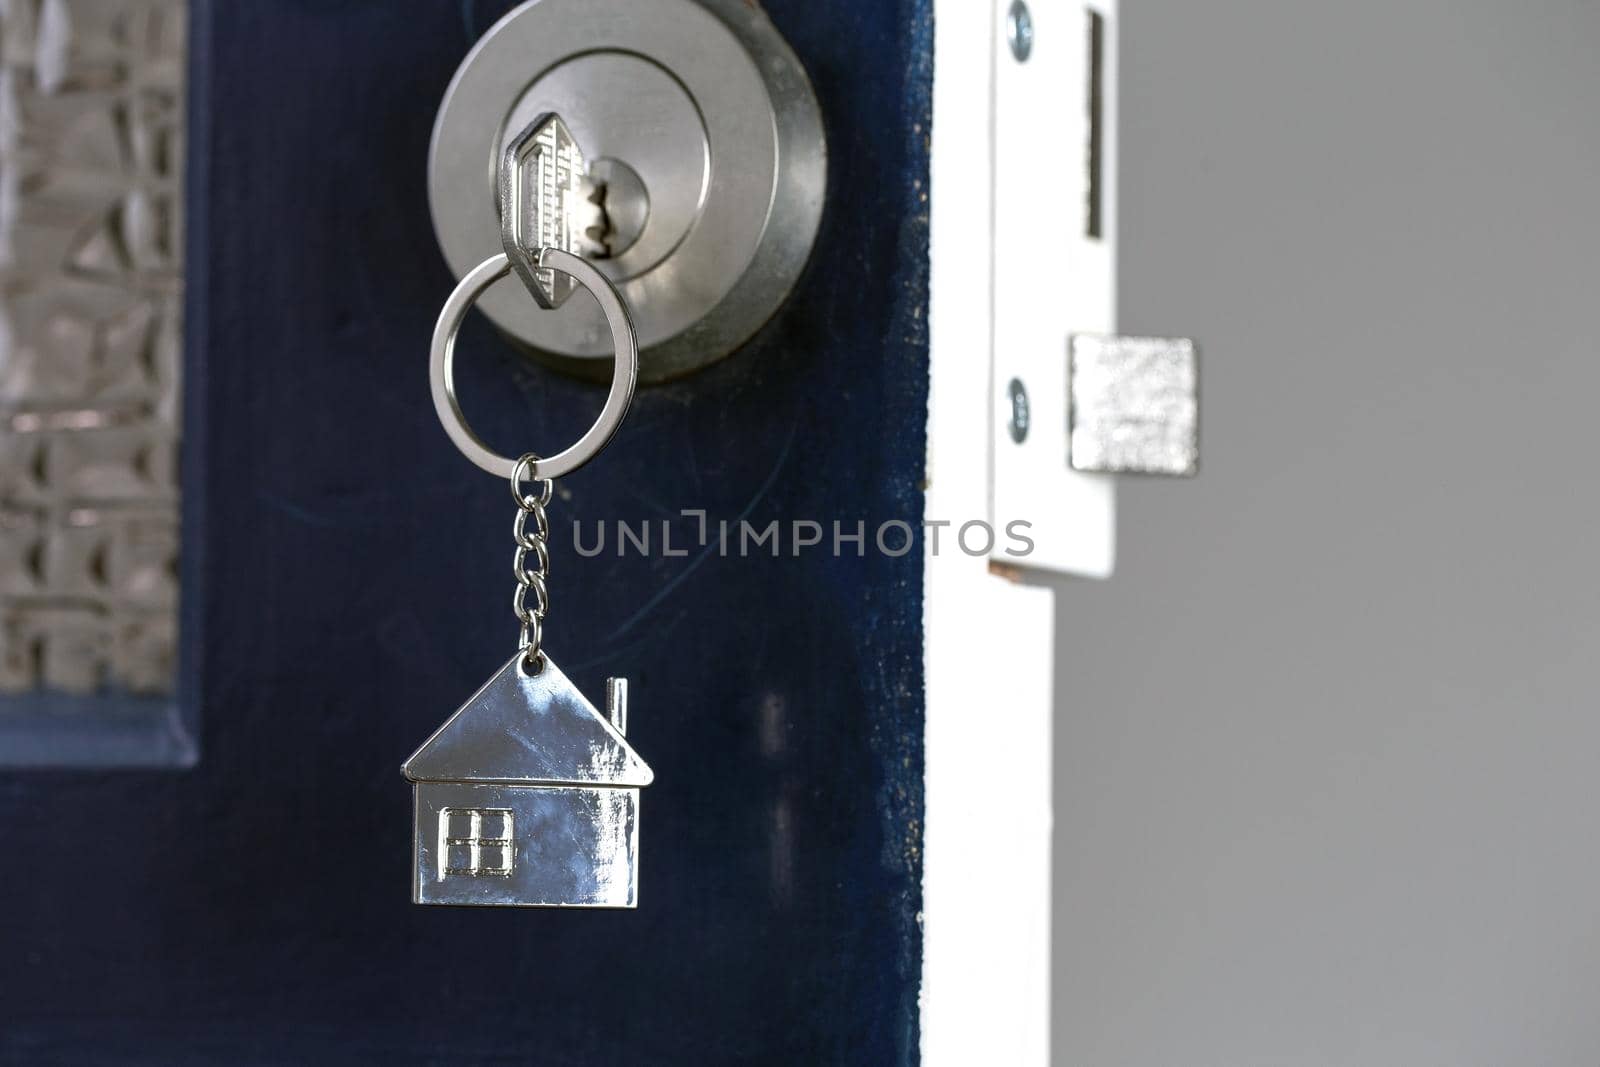 Open door to a new home with key and home shaped keychain. Mortgage, investment, real estate, property and new home concept business